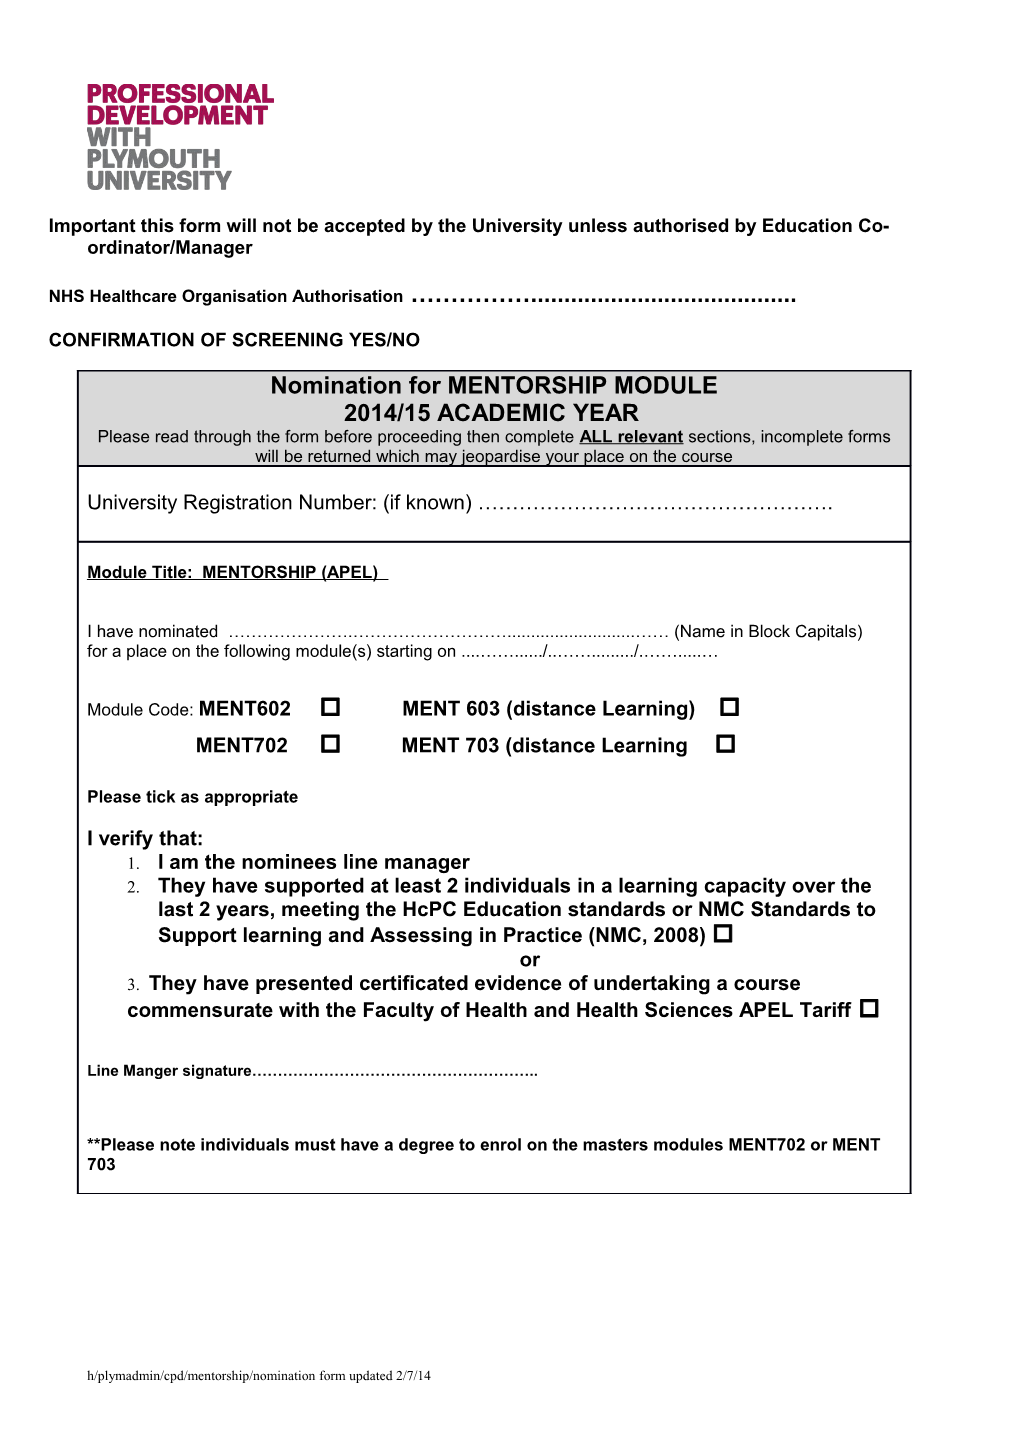 IHS Nomination Form